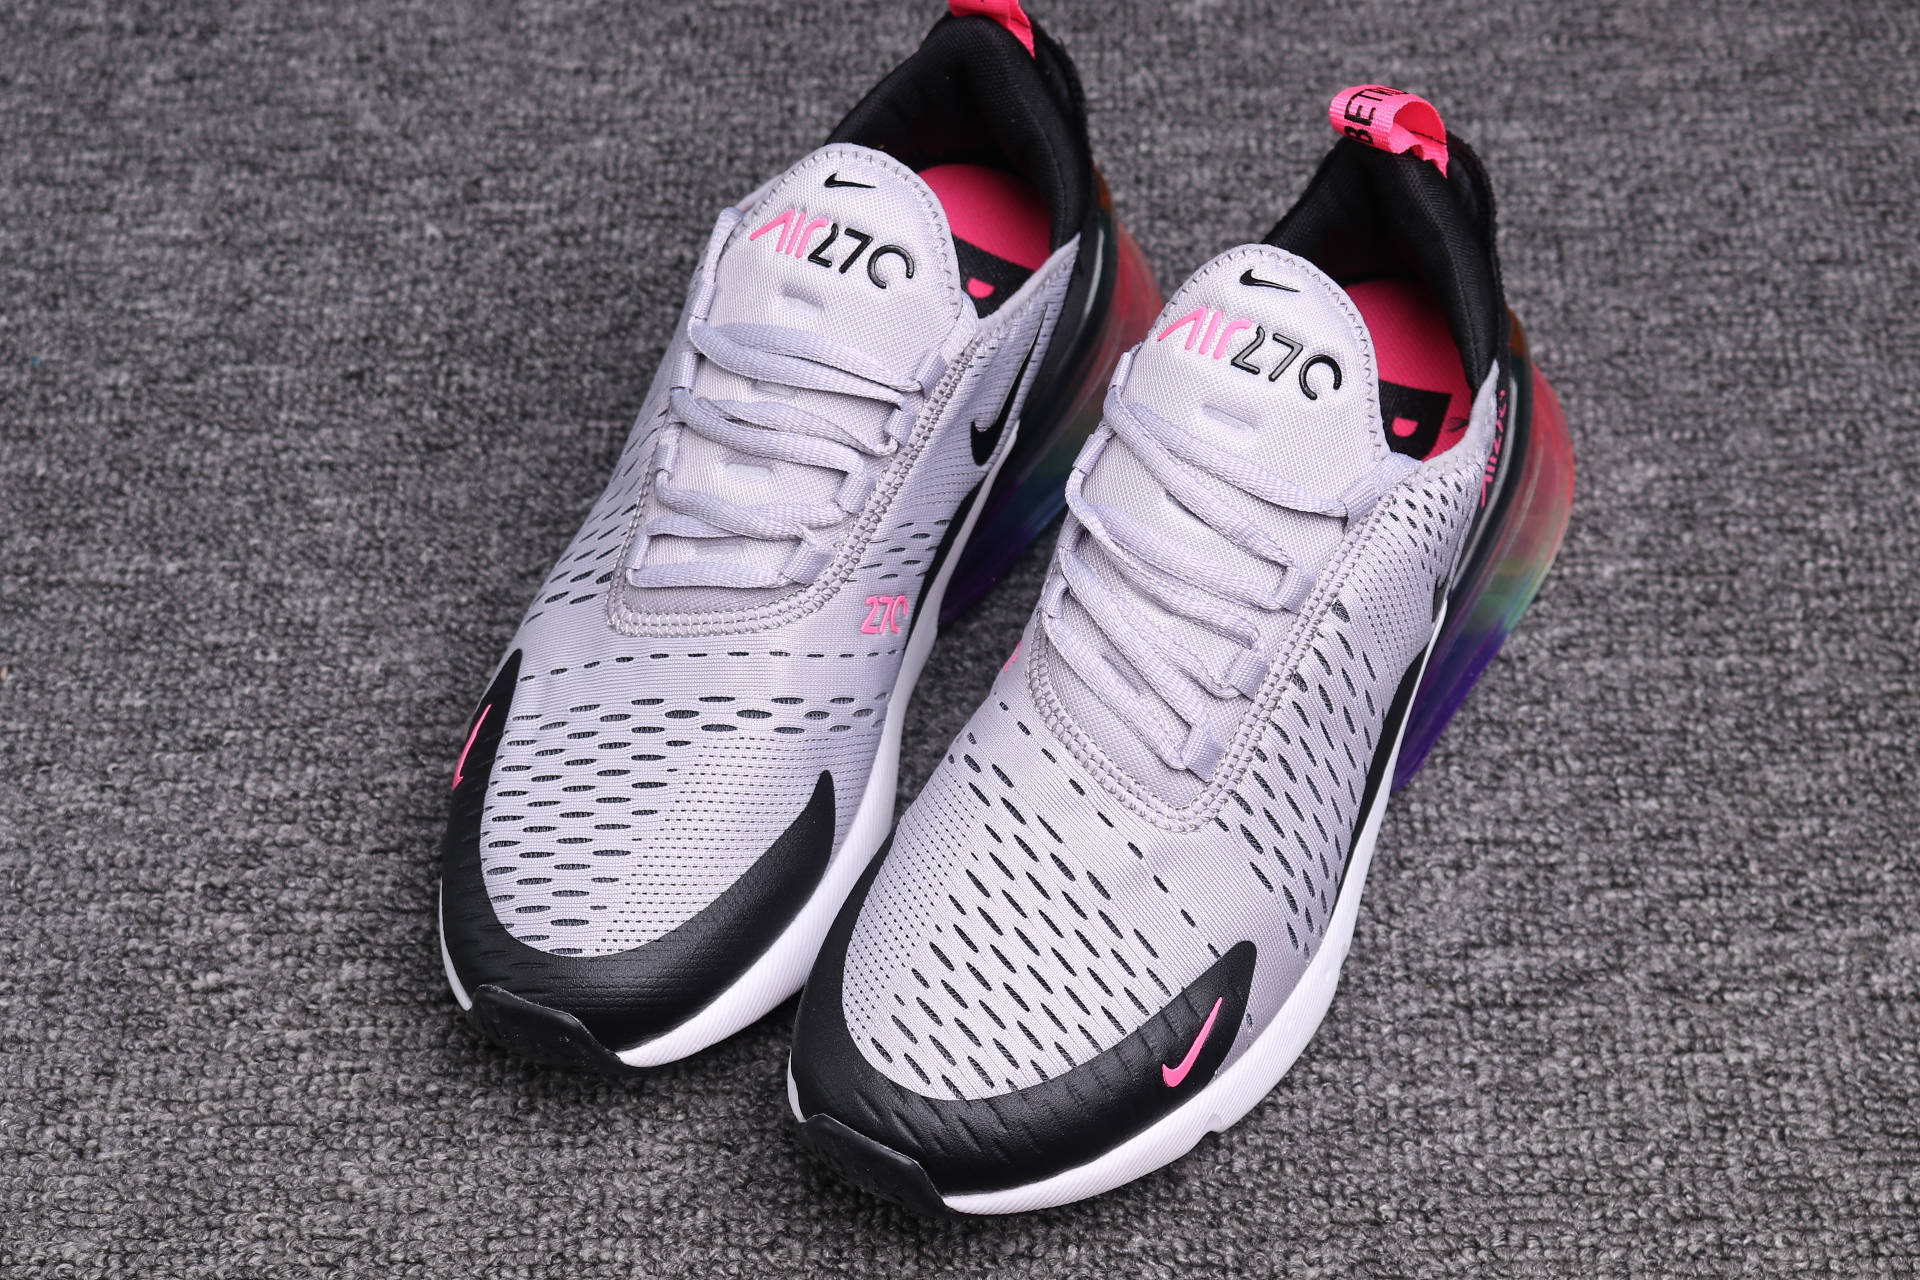 Supreme x Nike Air Max 270 Grey Black Red Shoes - Click Image to Close